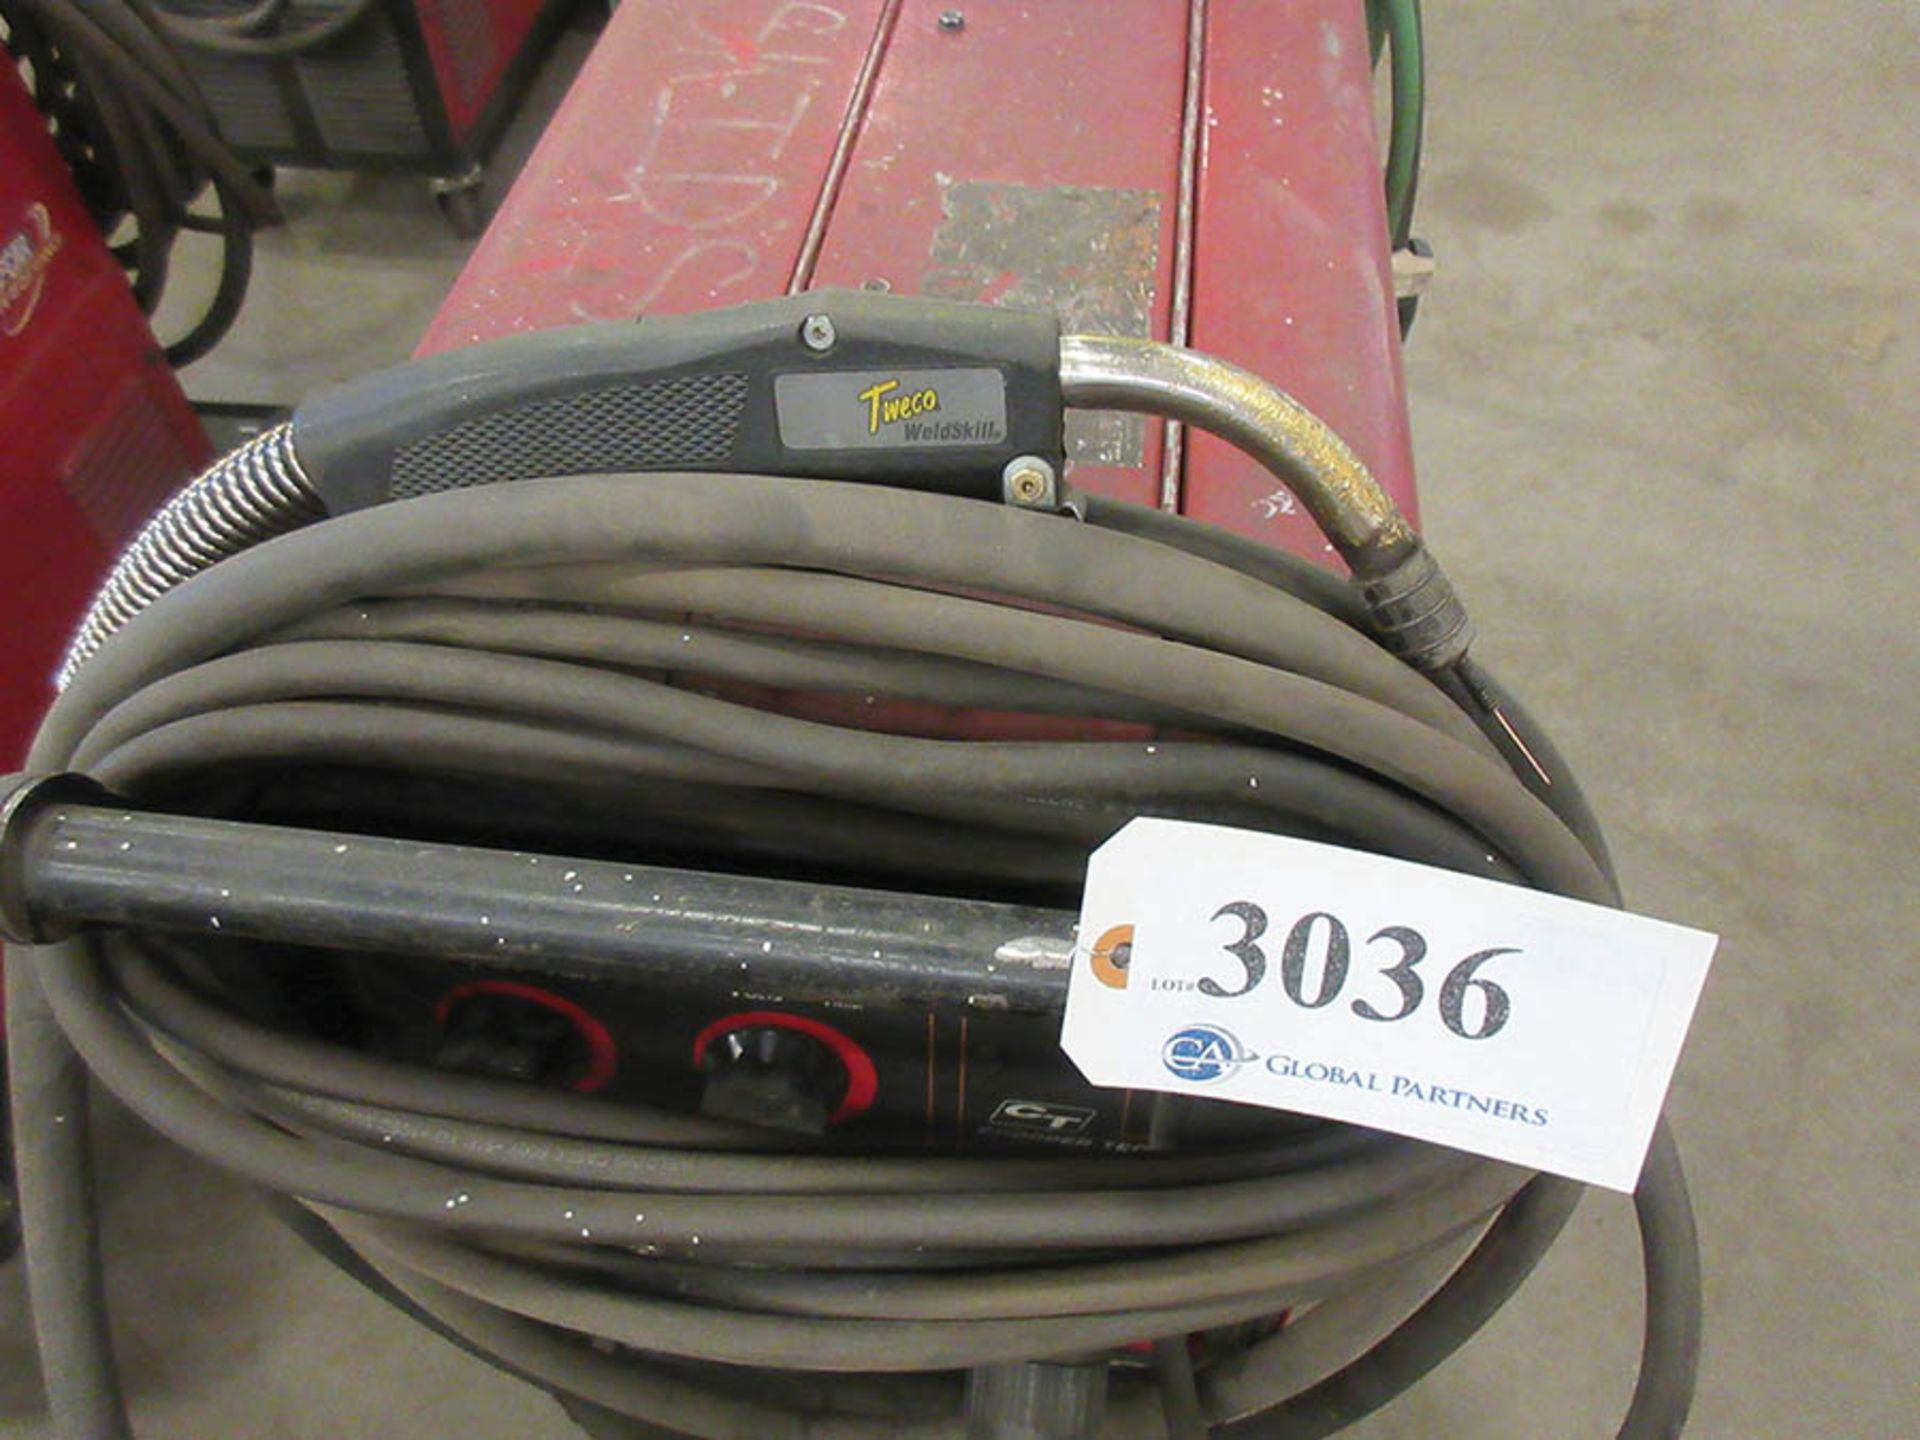 LINCOLN ELECTRIC 350MP POWER MIG WELDER WITH TWECO WELDSKILL MIG GUN, #92 - Image 3 of 3